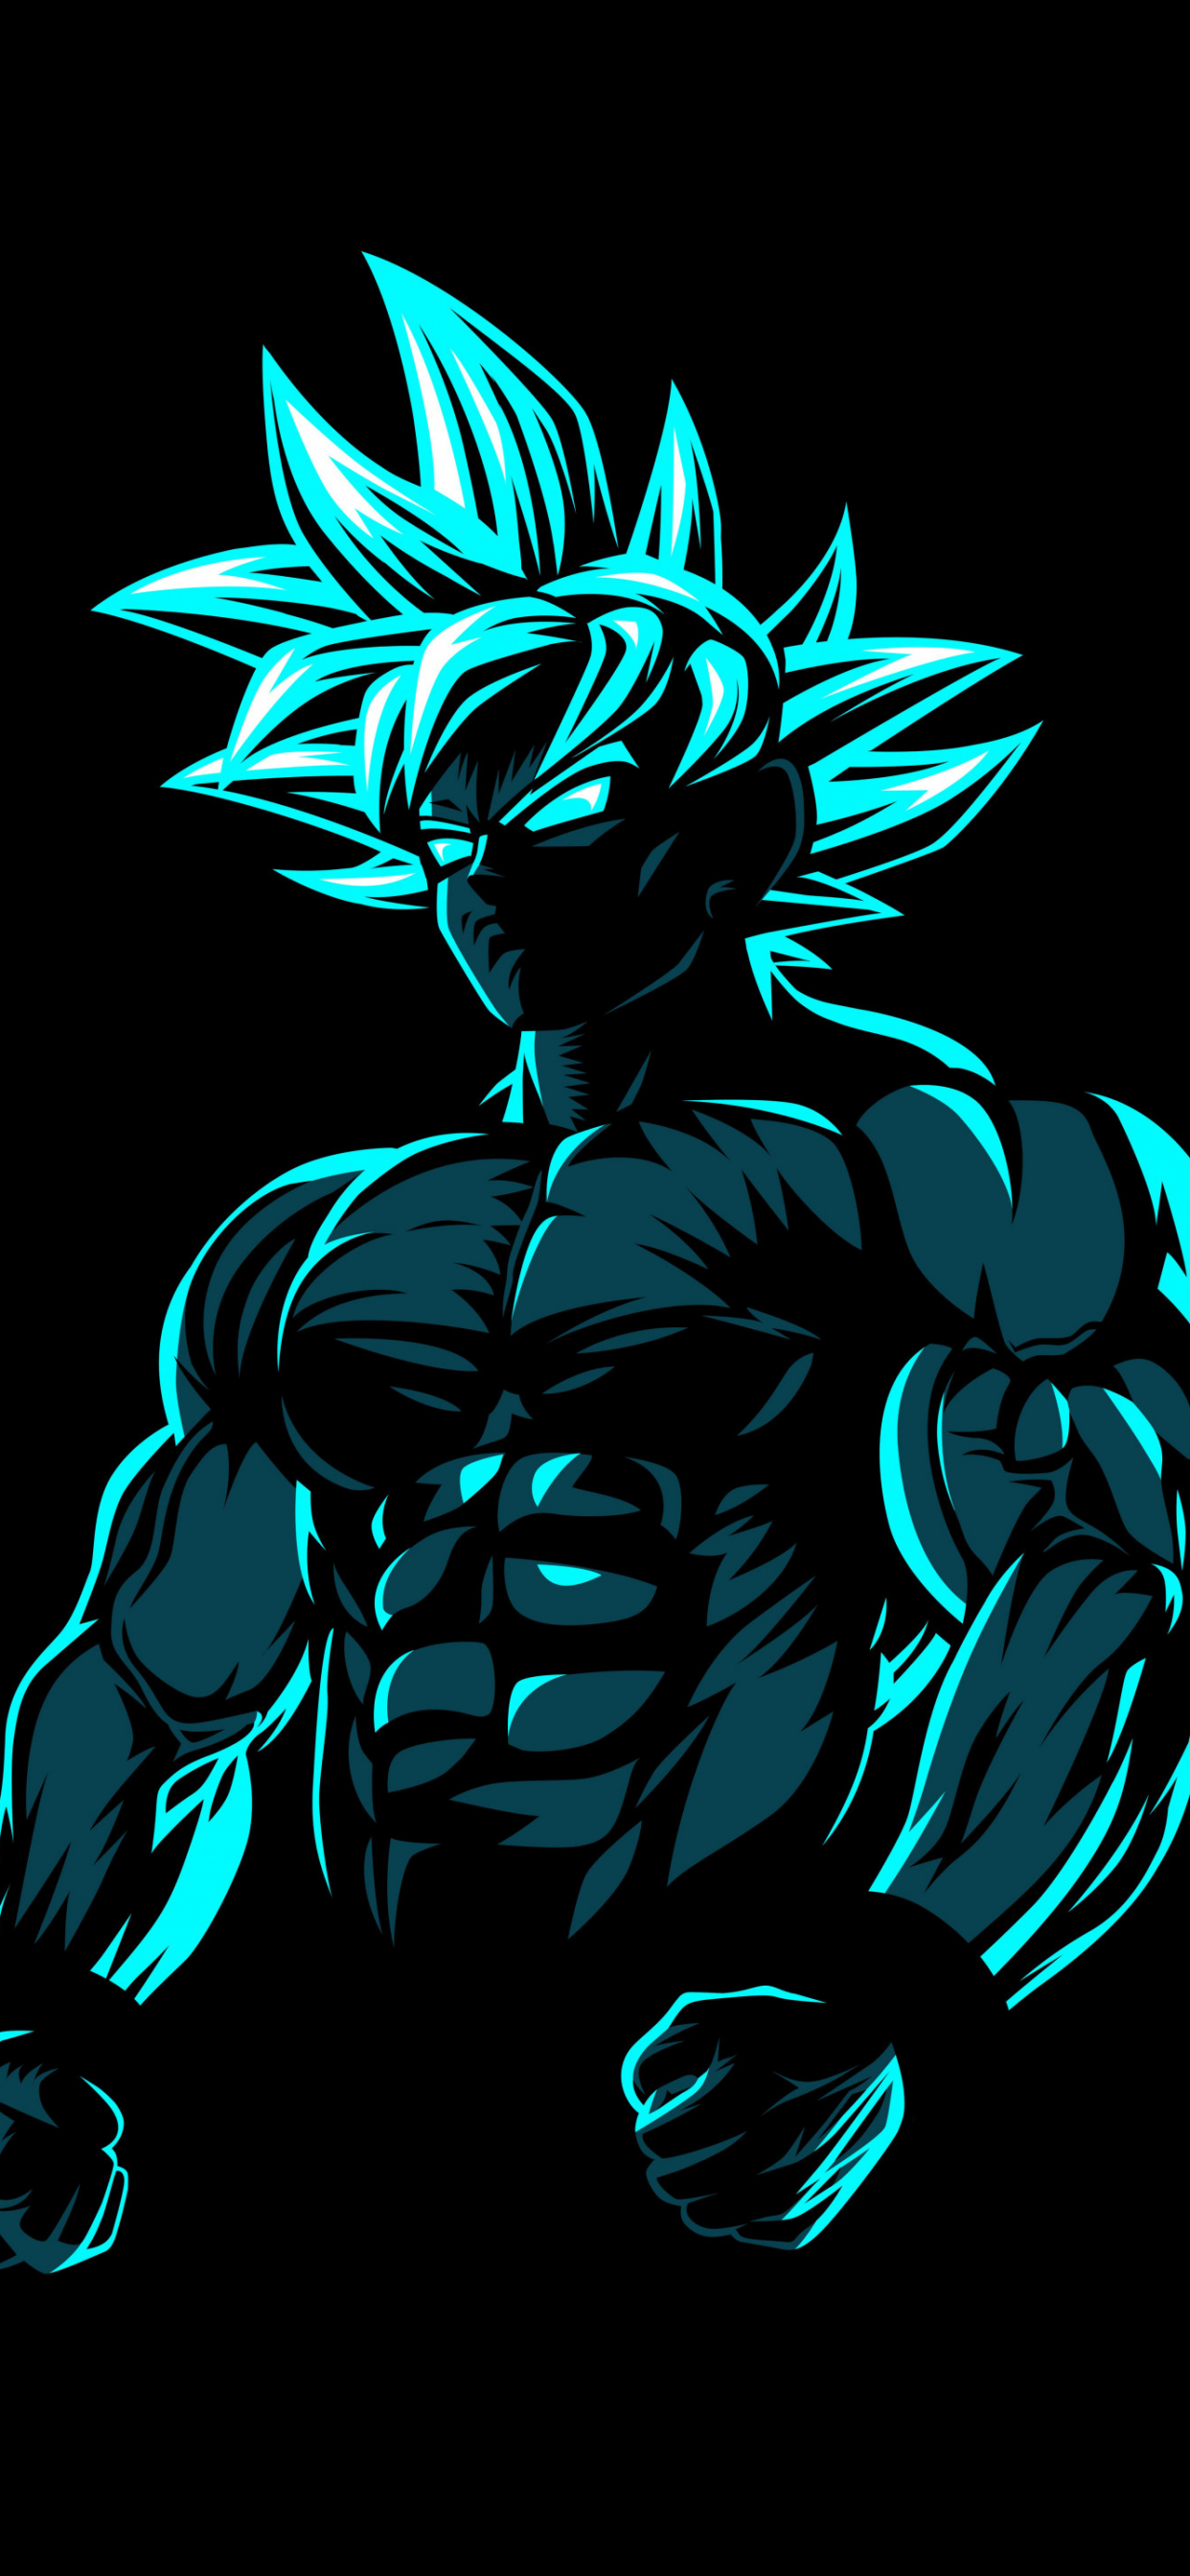 Songoku Wallpapers New APK pour Android Télécharger